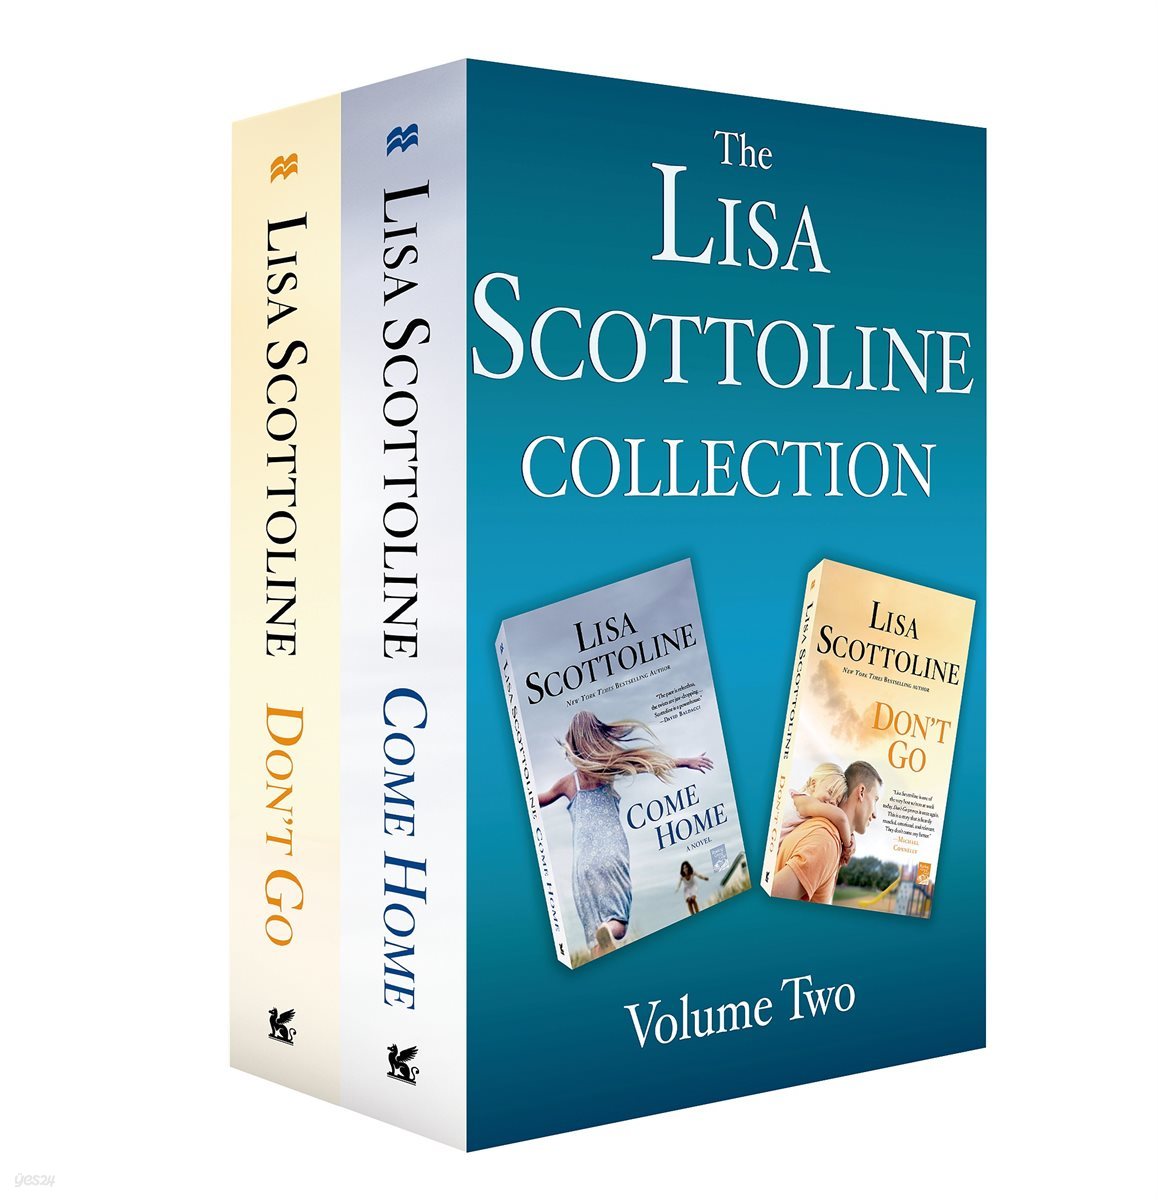 The Lisa Scottoline Collection